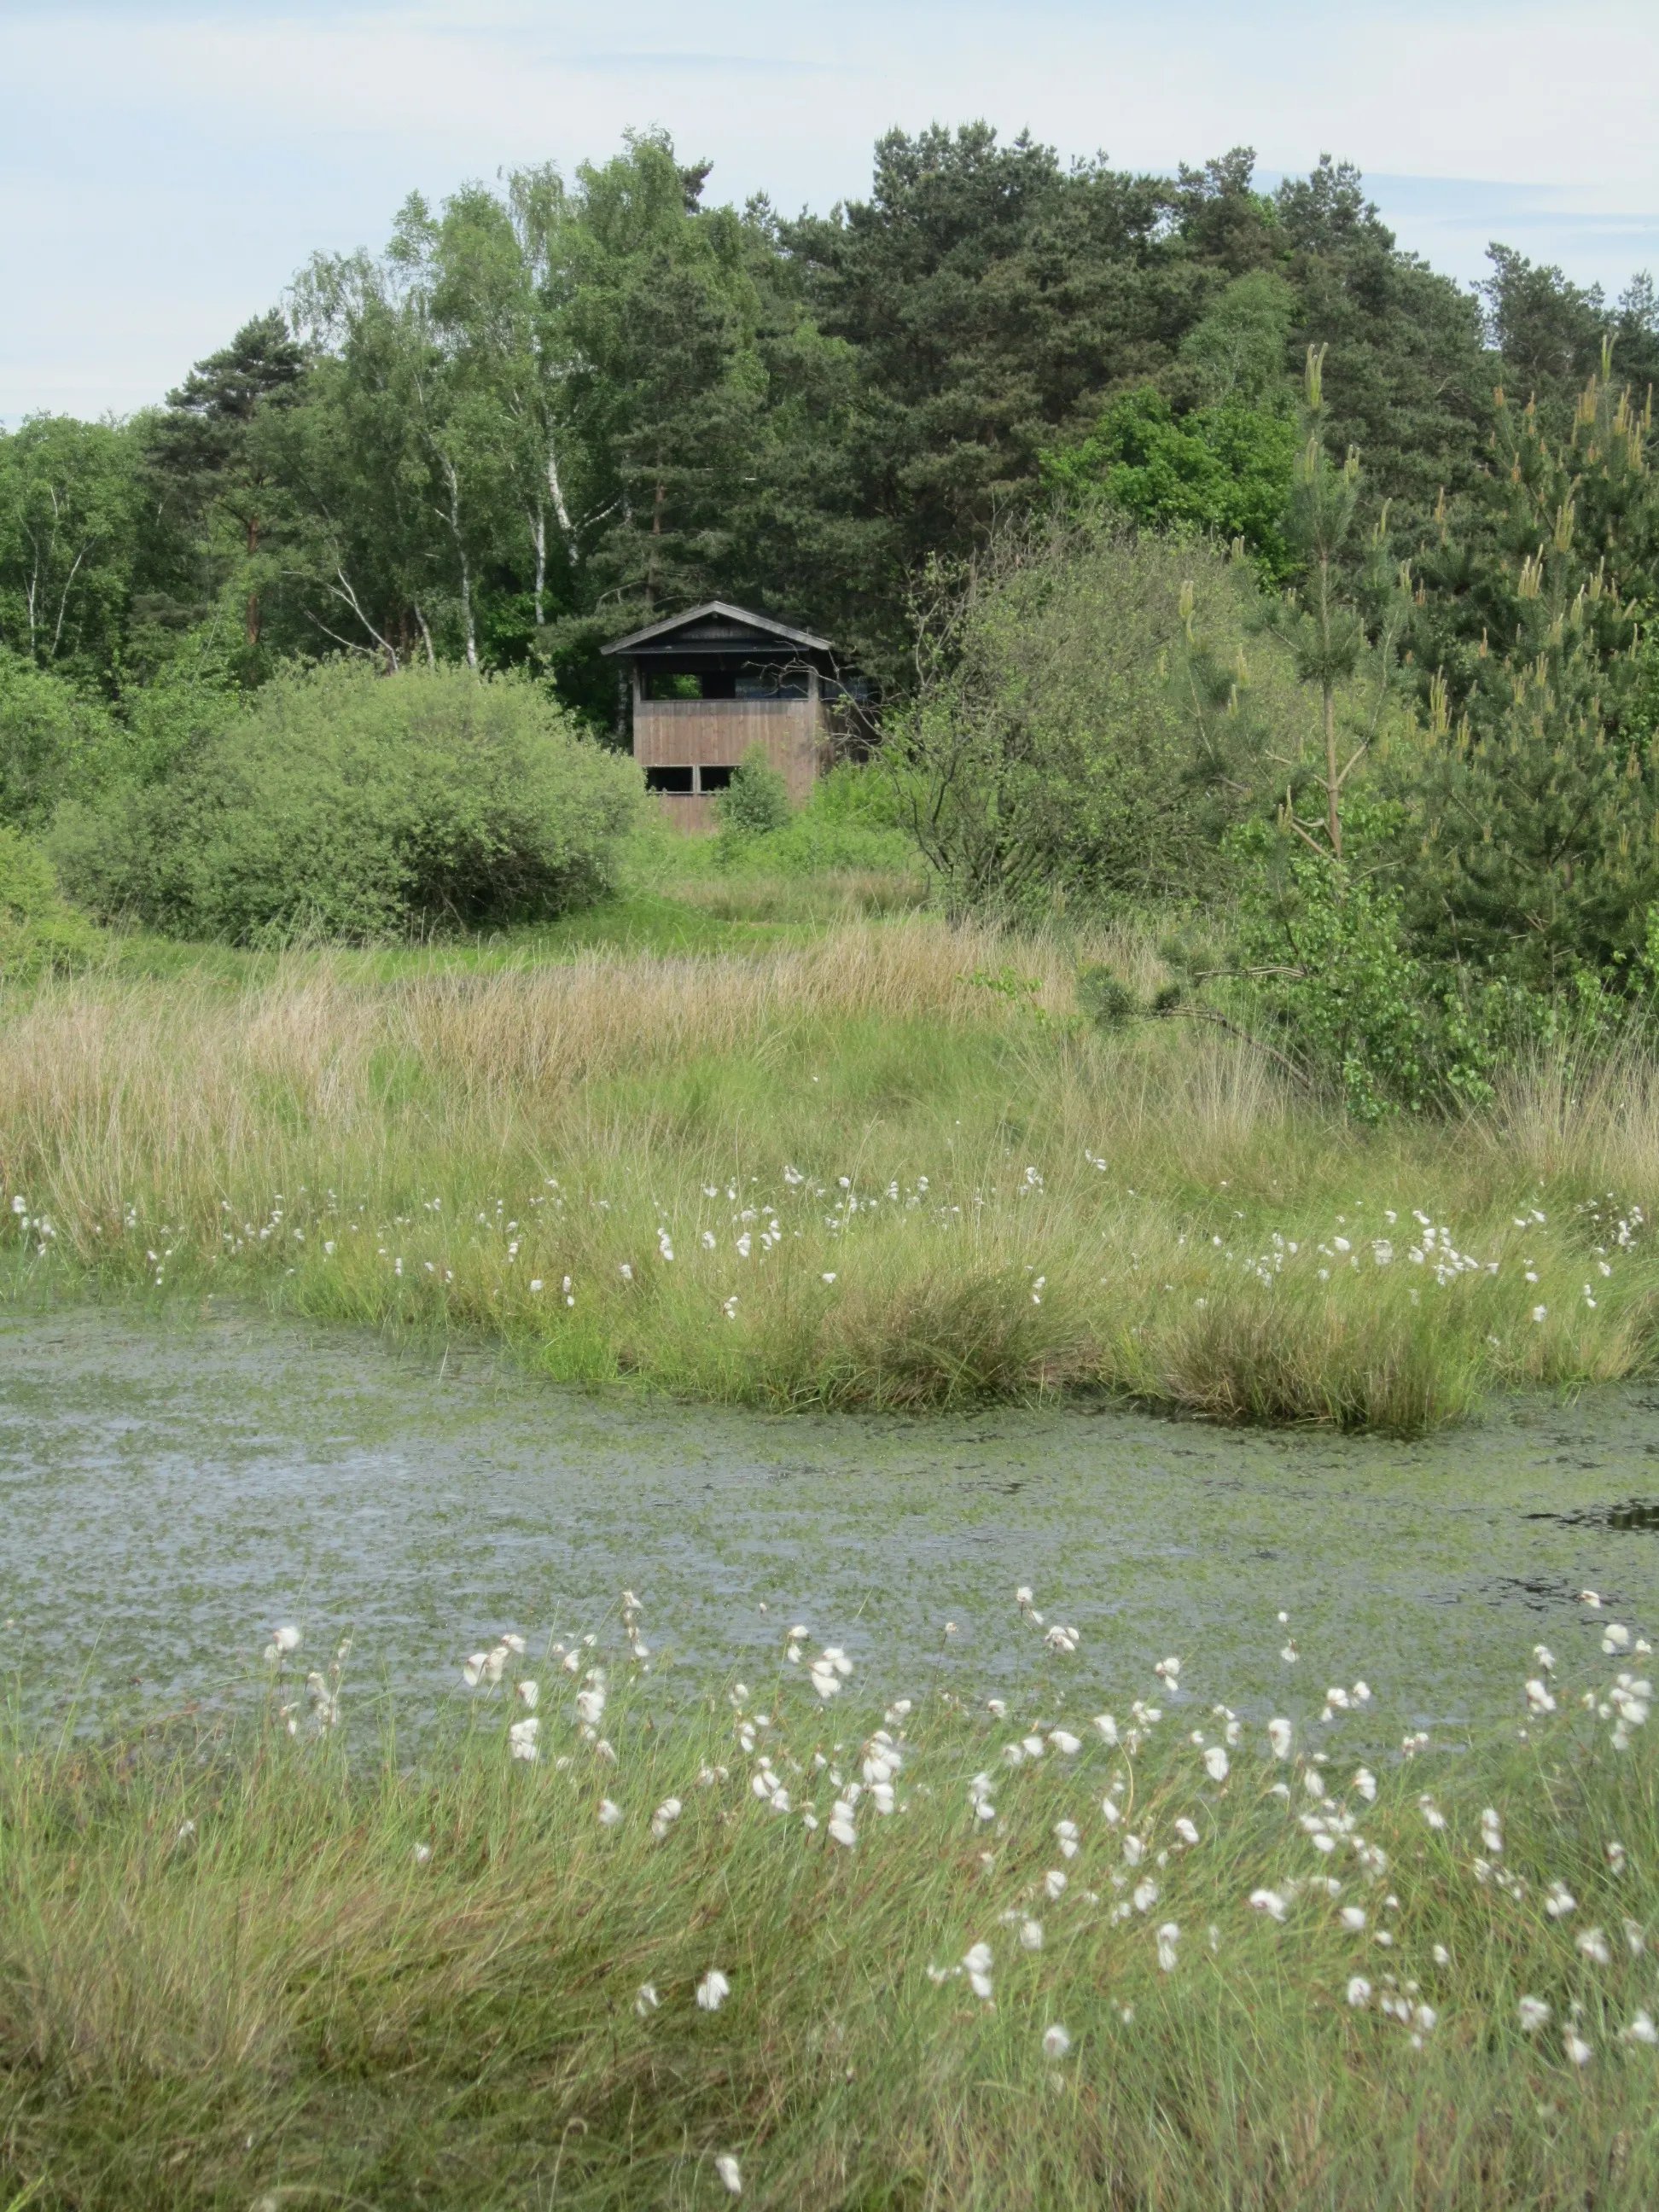 Photo showing: Bog "Neustädter Moor" near Ströhen (Wagenfeld, Landkreis Diepholz, Lower Saxony); the "Small Observation Tower" in the background